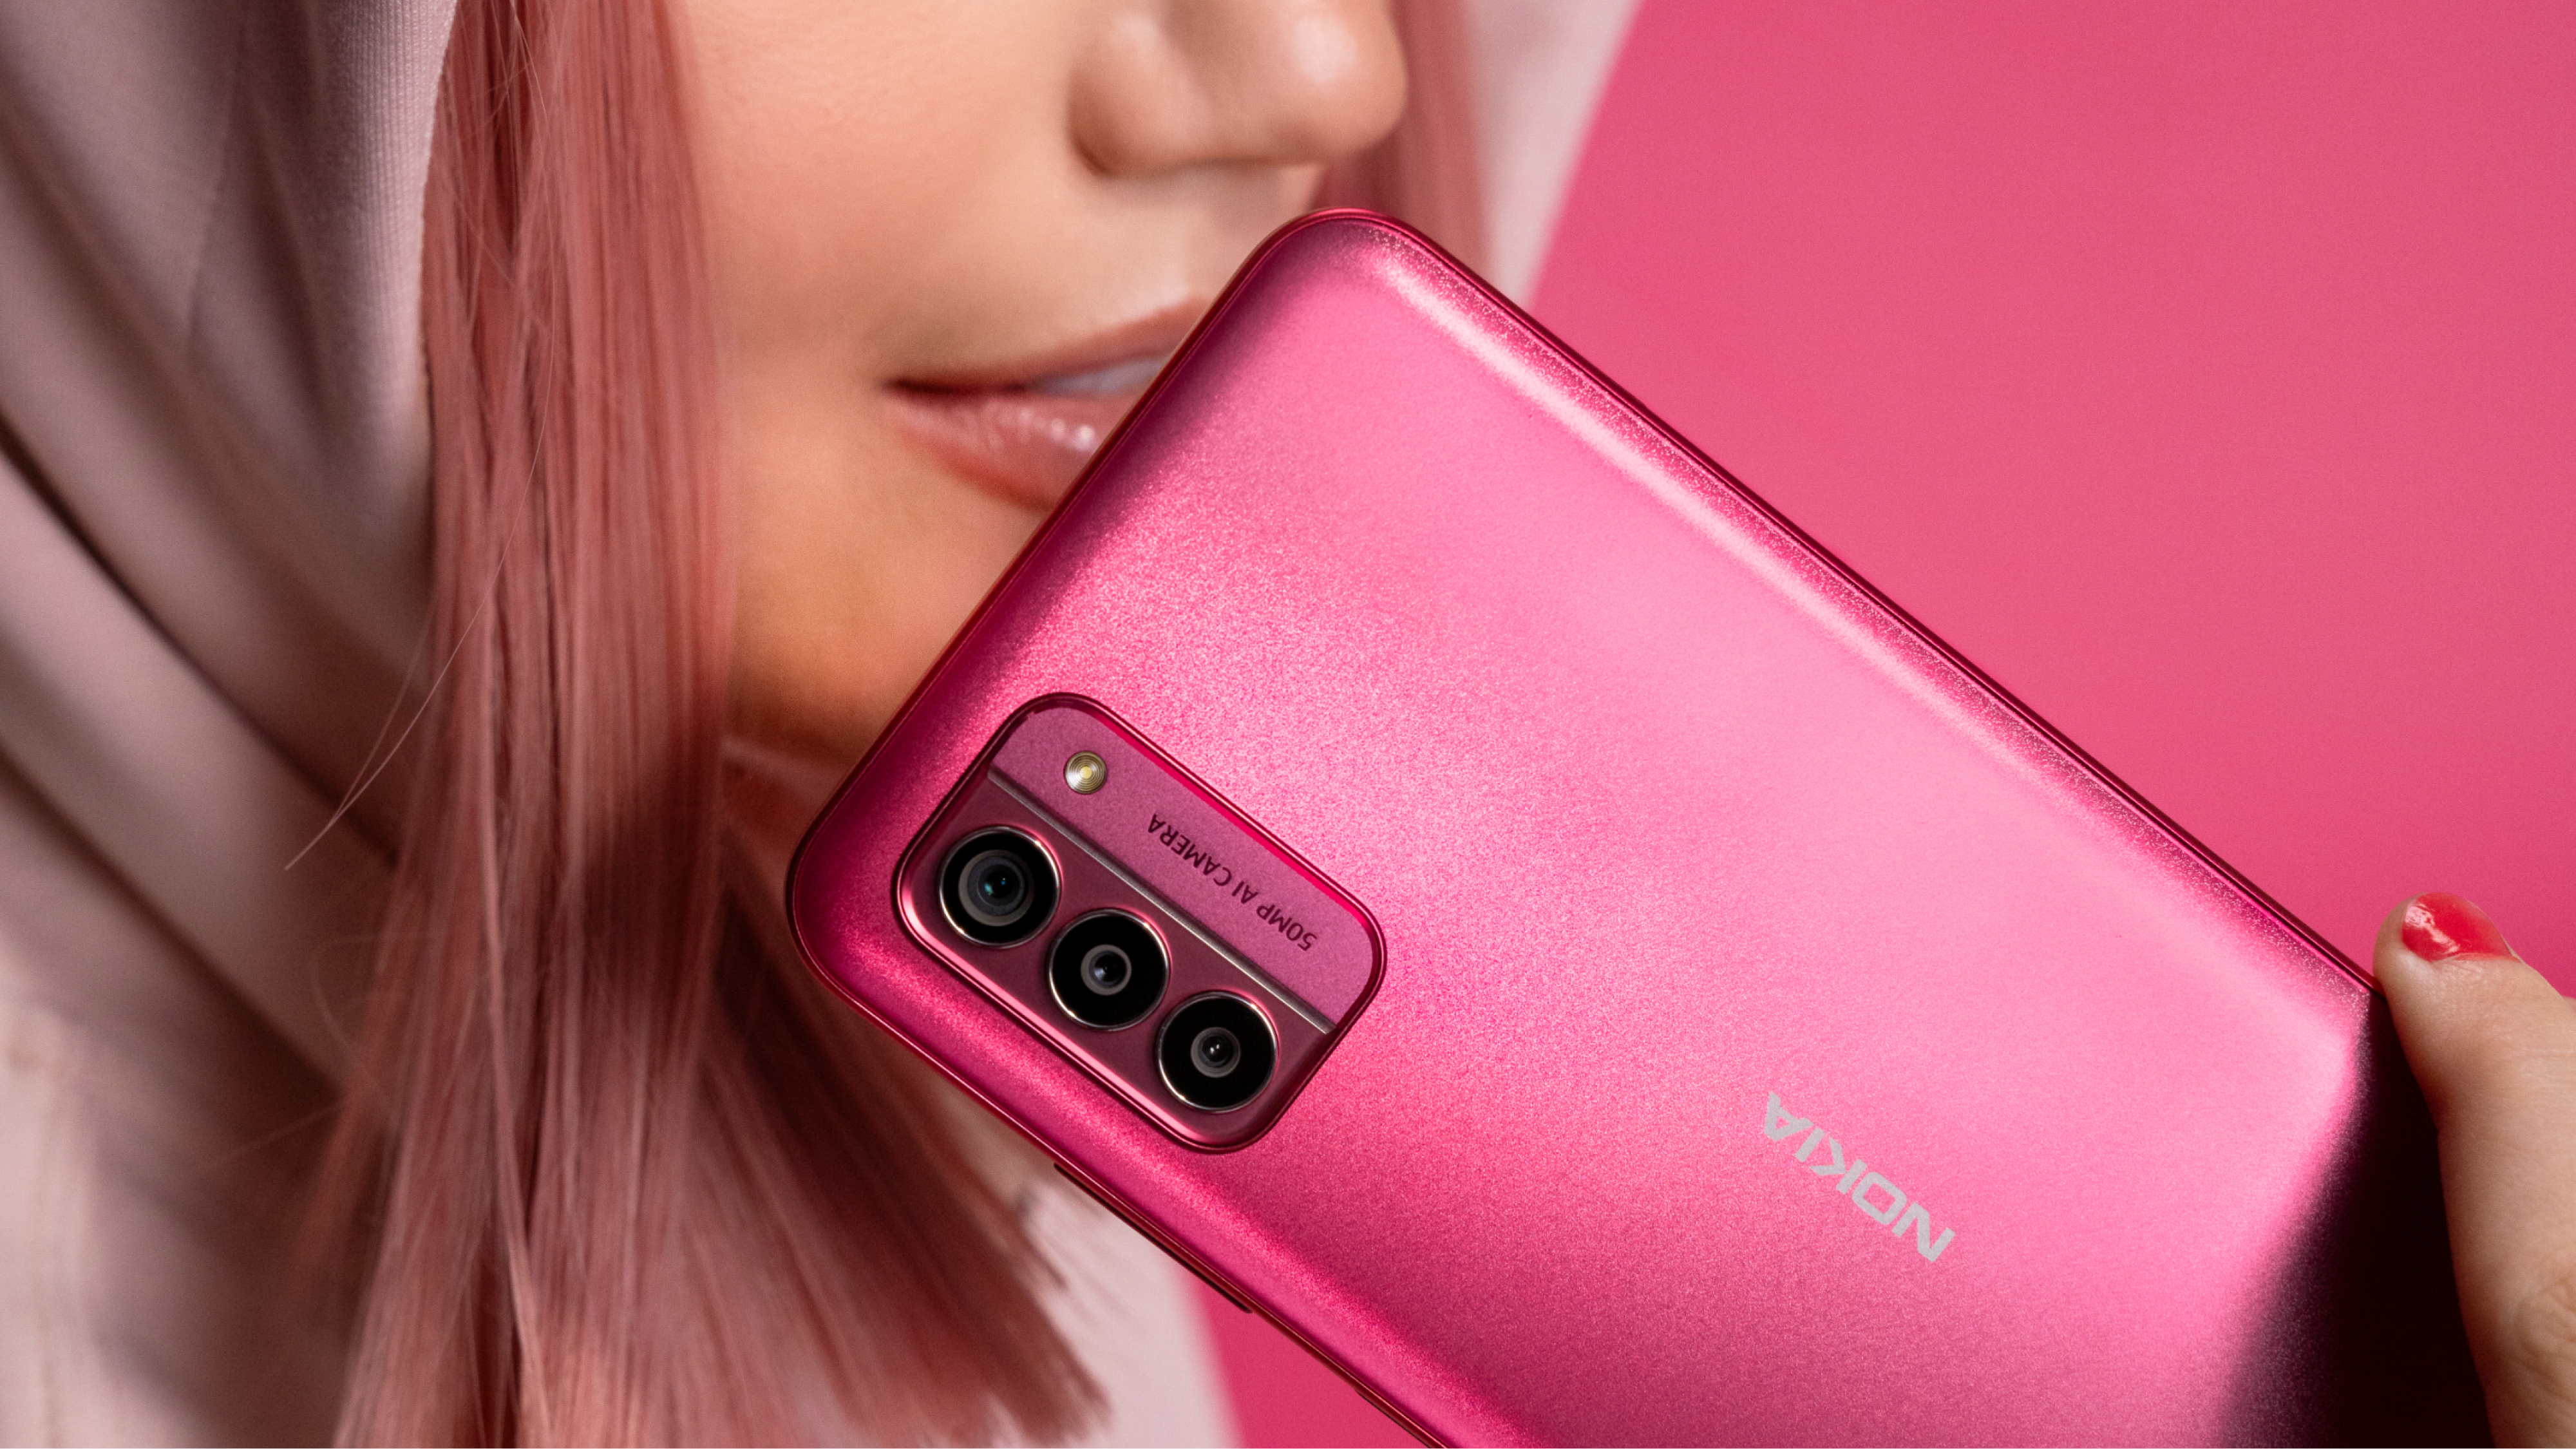 Repairable and fashionable: Nokia G42 goes 5G So Pink